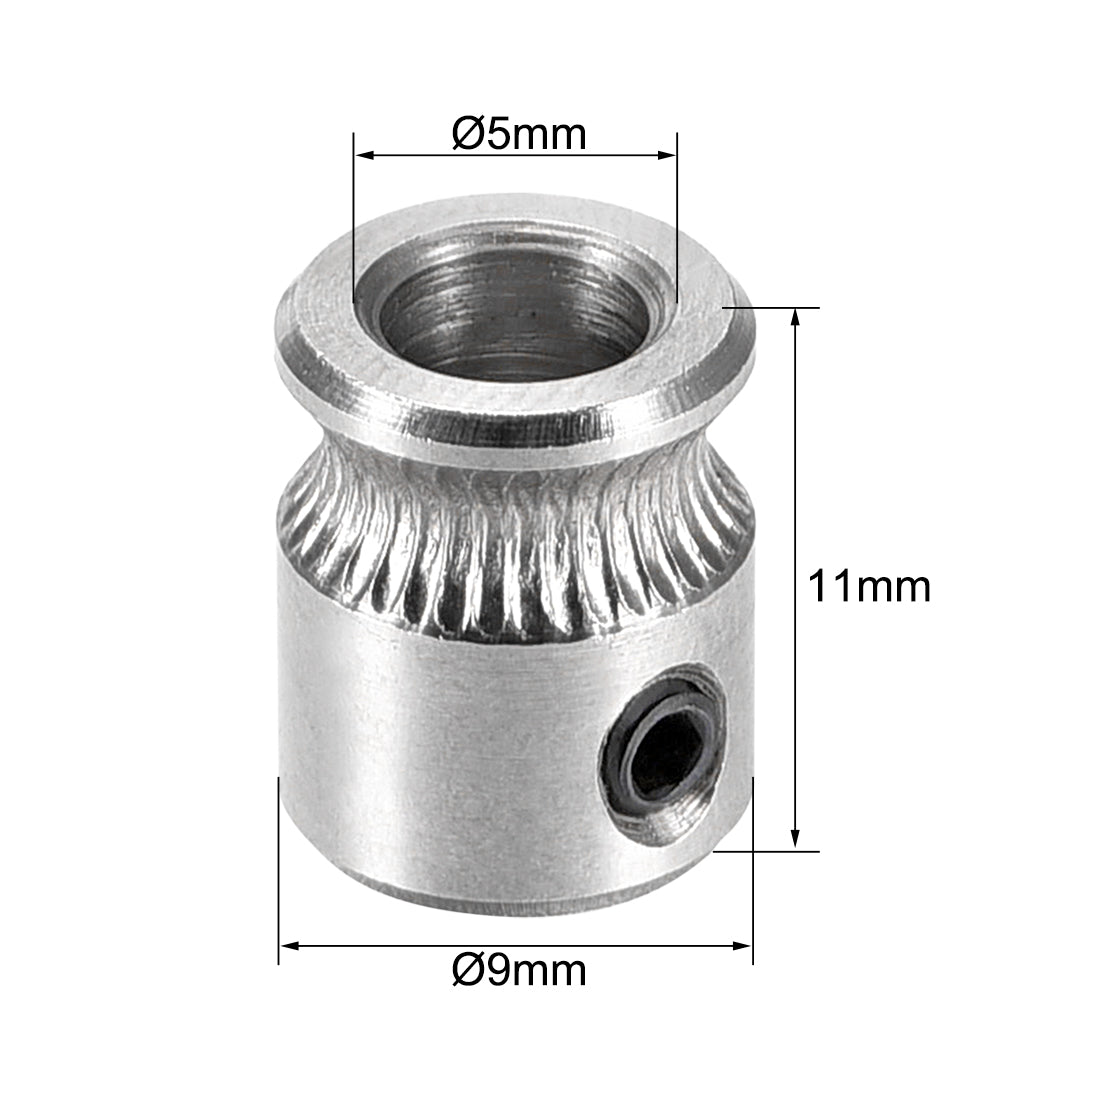 uxcell Uxcell MK8 Drive Gear Direct Extruder Drive 5mm Bore for Extruder 2pcs